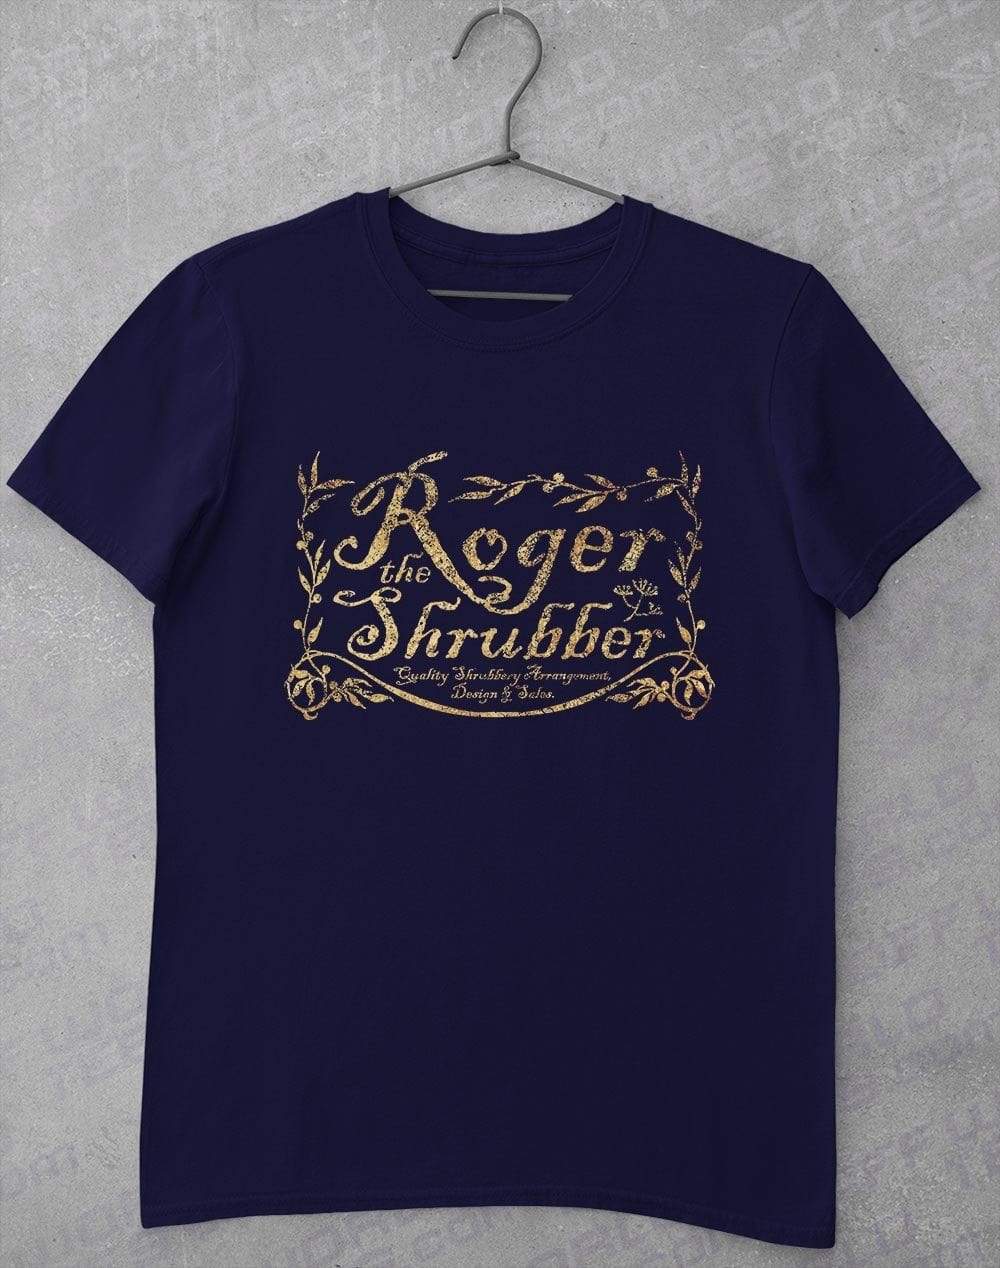 Roger the Shrubber T-Shirt S / Navy  - Off World Tees